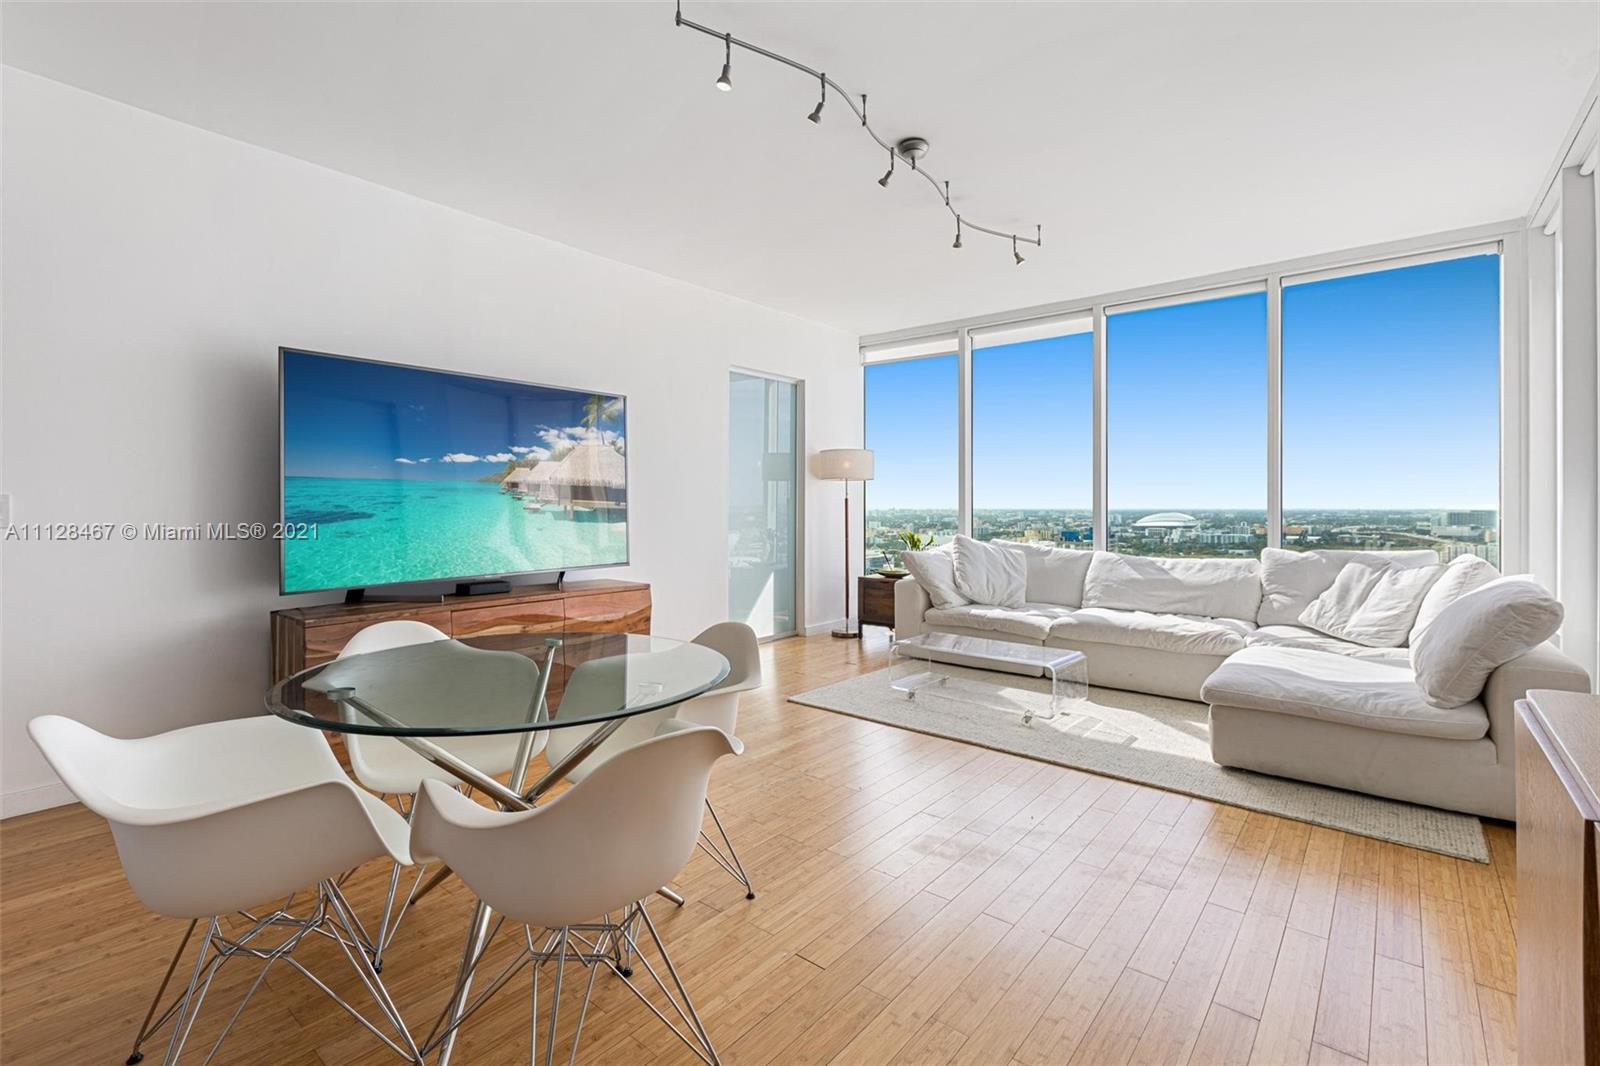 Gorgeous 2 beds  2 baths corner residence with north west exposures overlooking the city's skyline. 